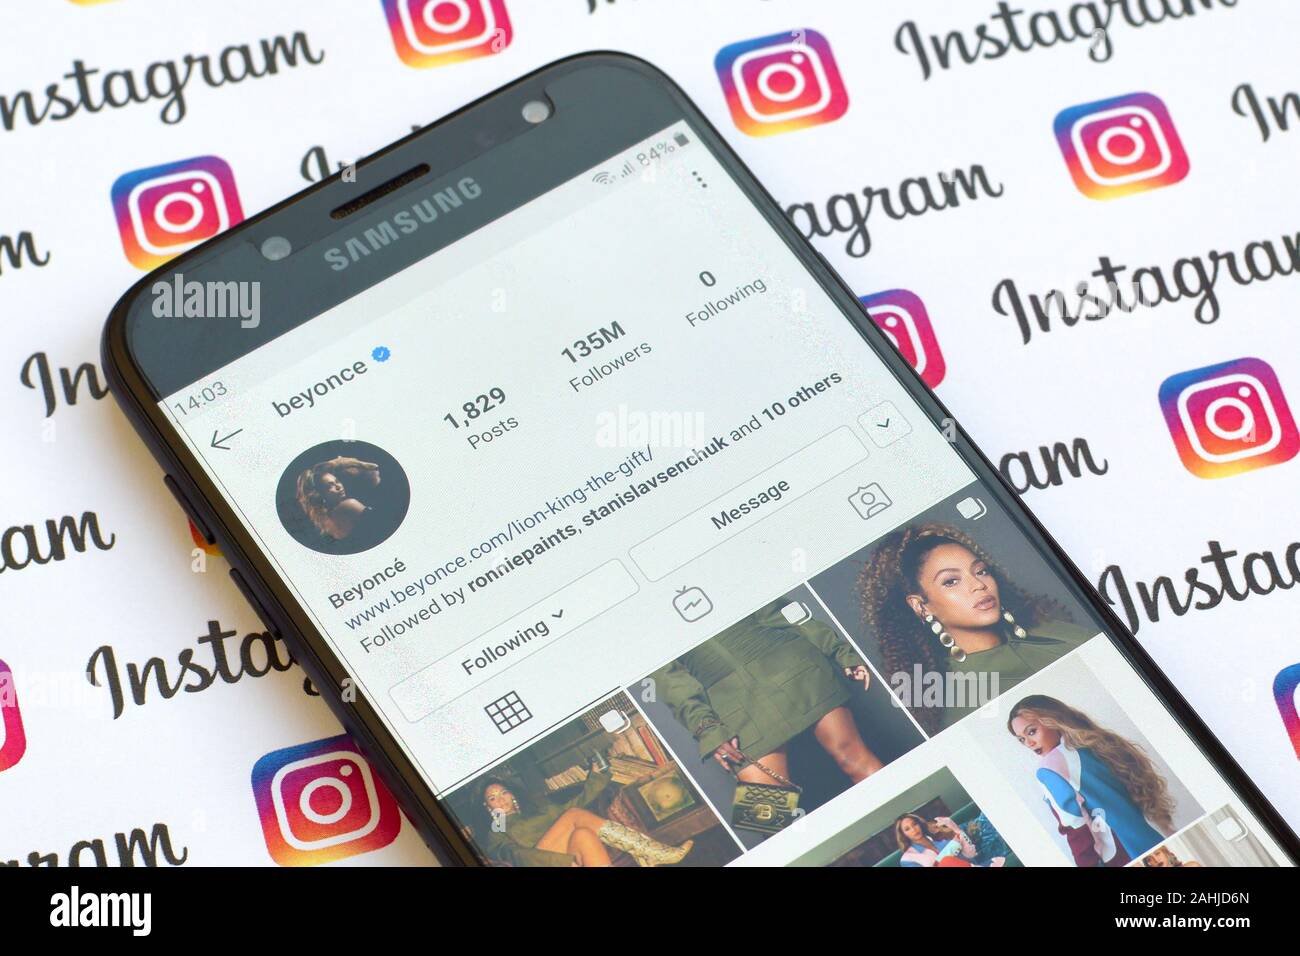 NY, USA - DECEMBER 4, 2019: Beyonce official instagram account on smartphone screen on paper instagram banner. Stock Photo